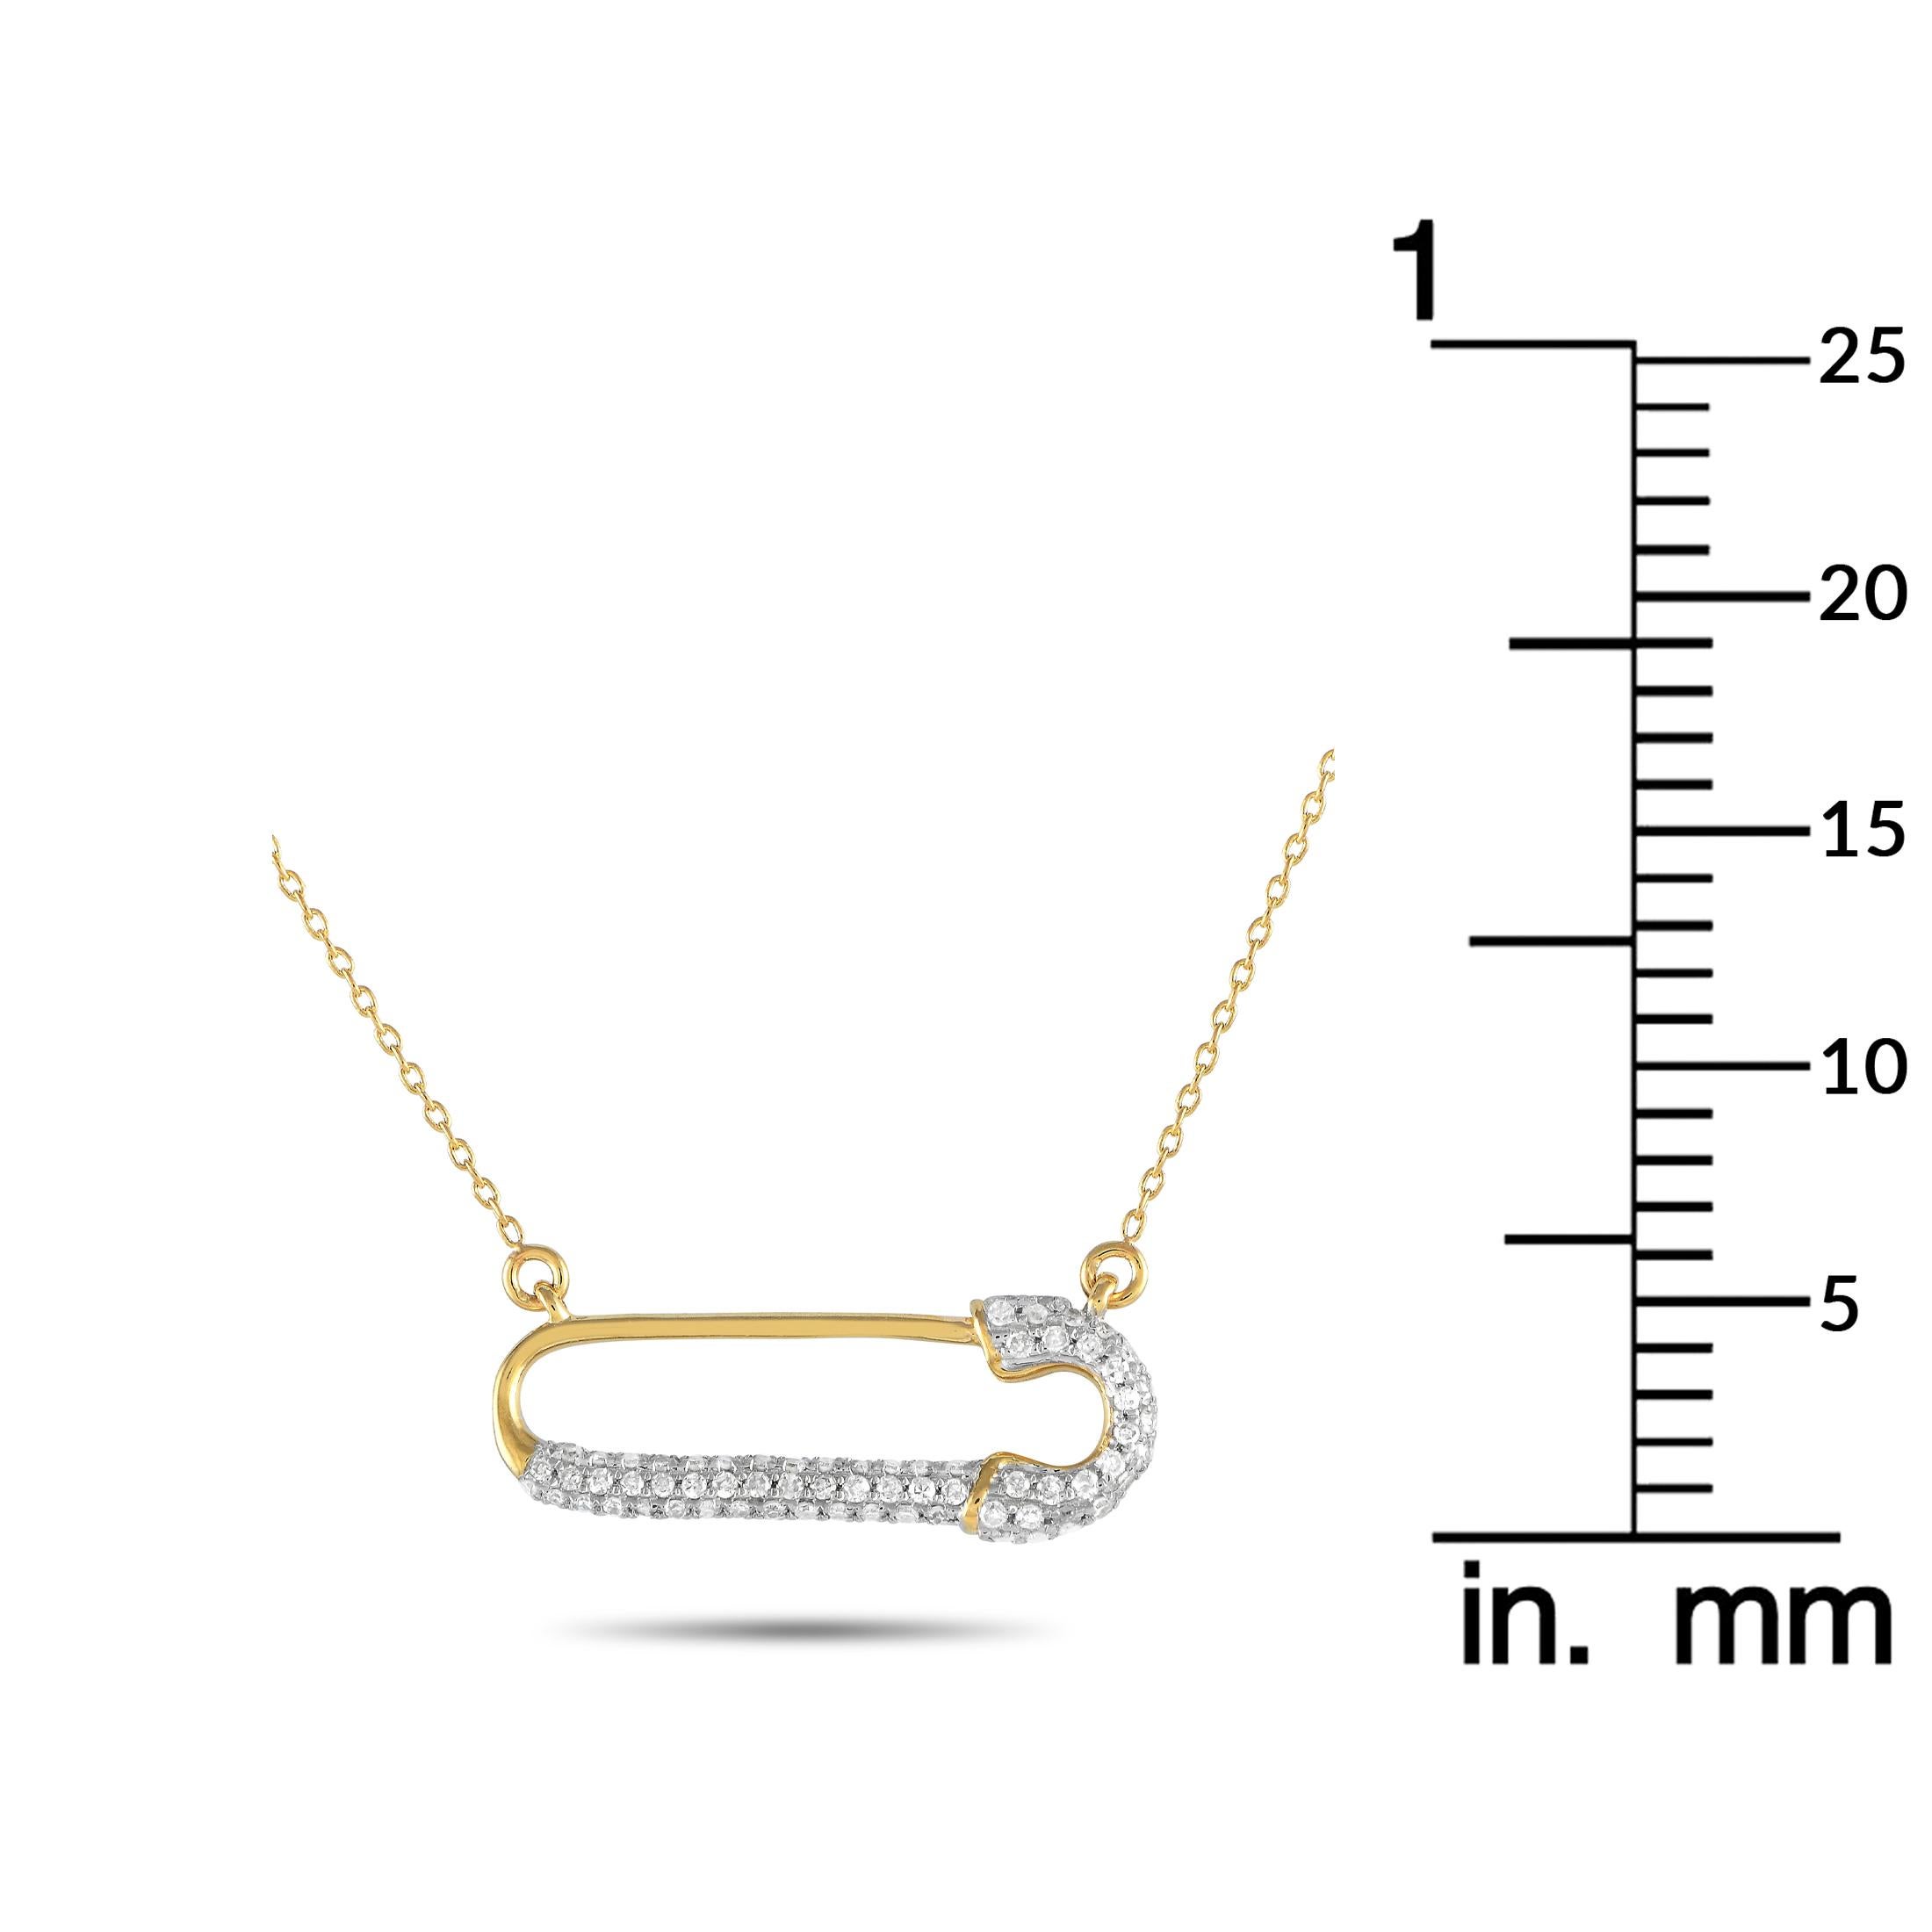 LB Exclusive 14K Yellow Gold 0.17ct Diamond Safety Pin Necklace NK4-14795Y In New Condition For Sale In Southampton, PA